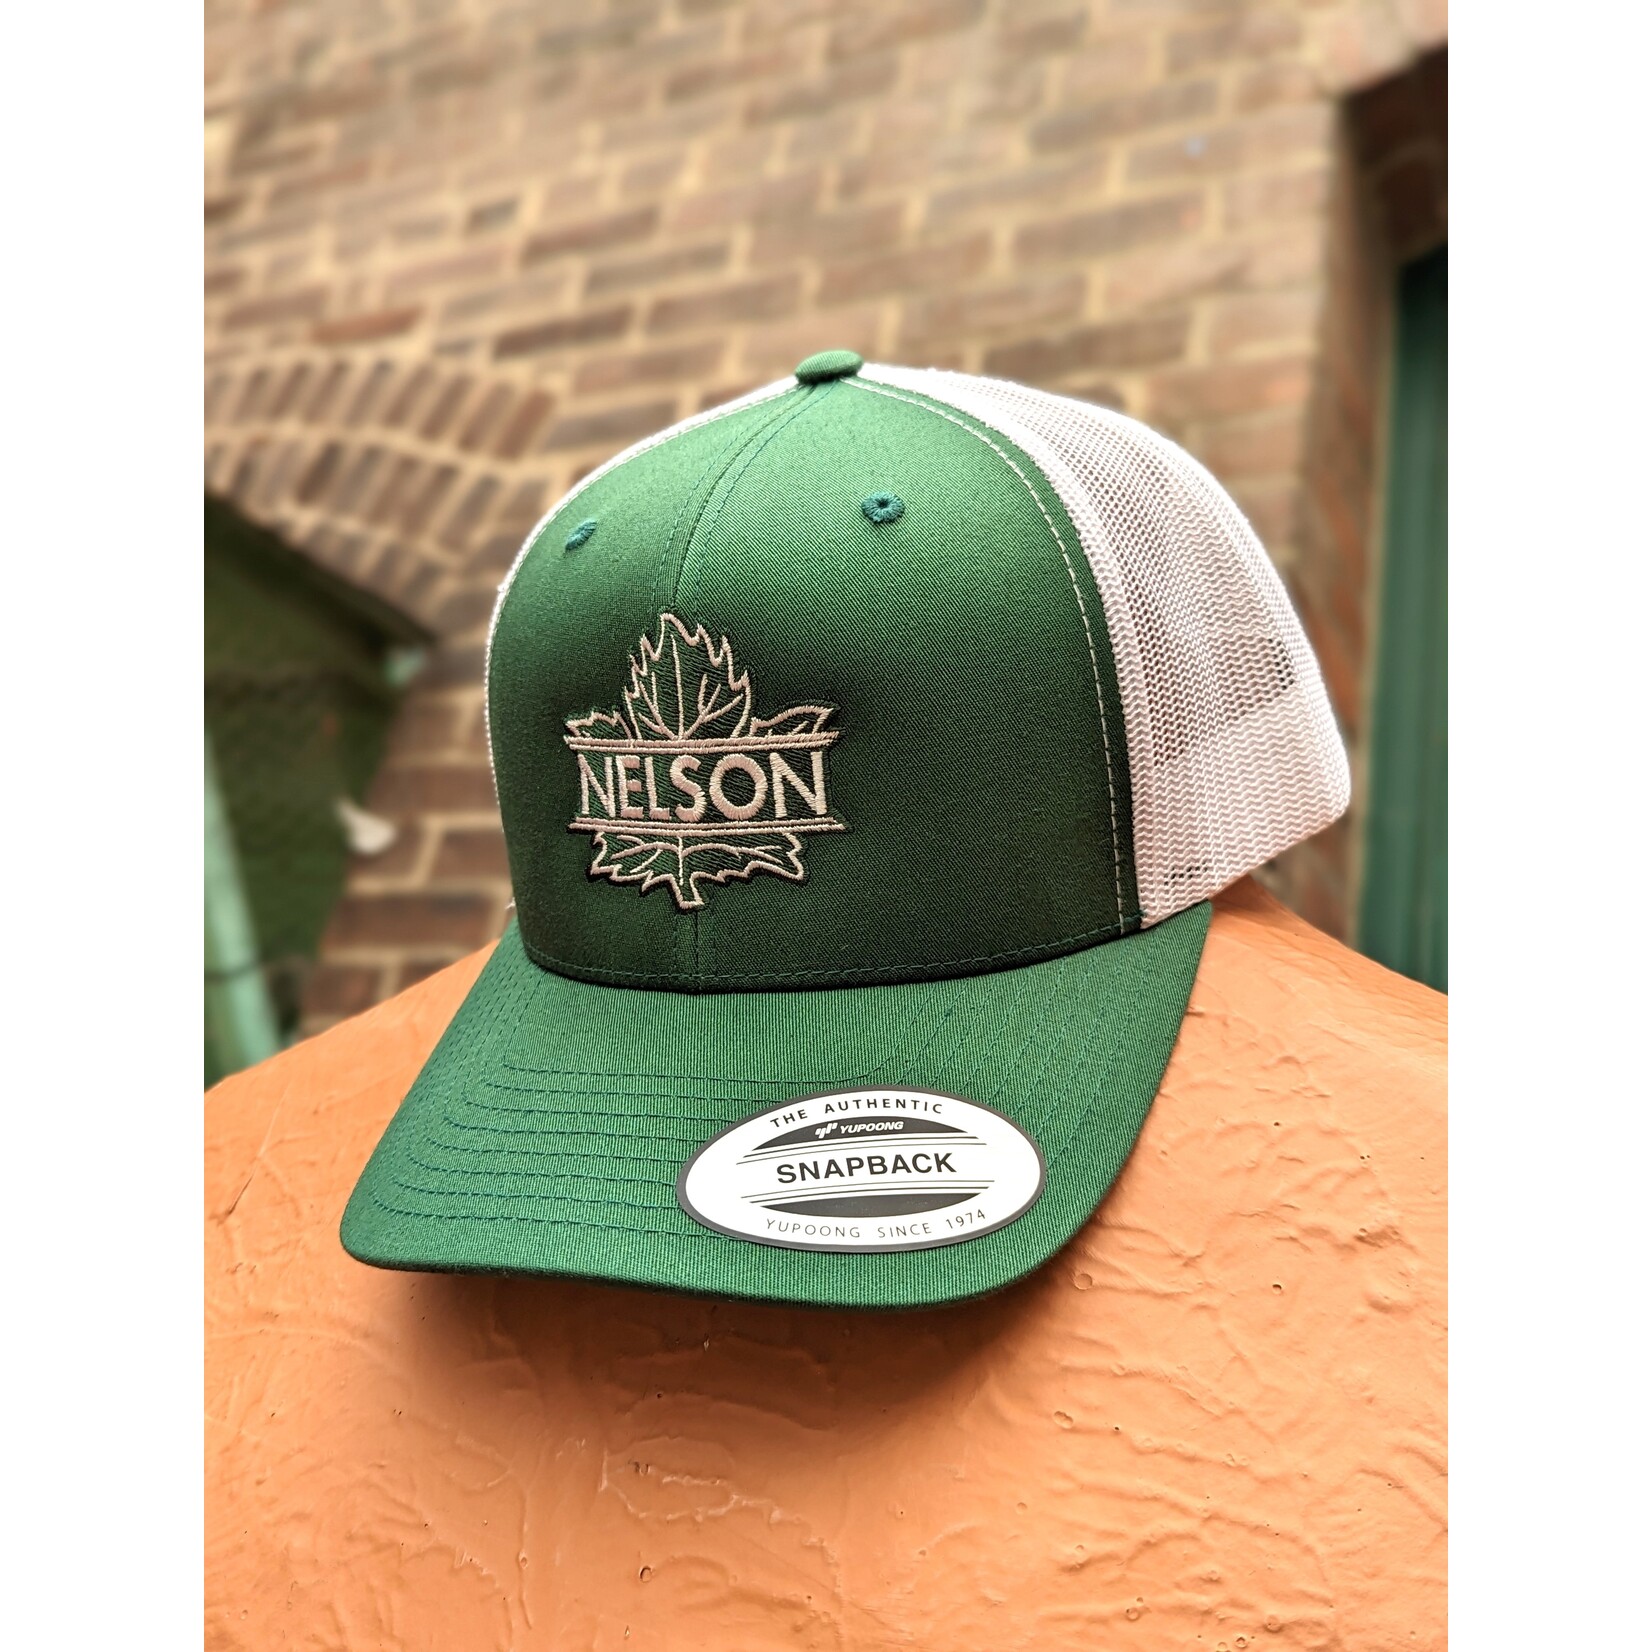 Nelson Leafs 6606 Retro Trucker Mesh Cap - 3 solid colours available